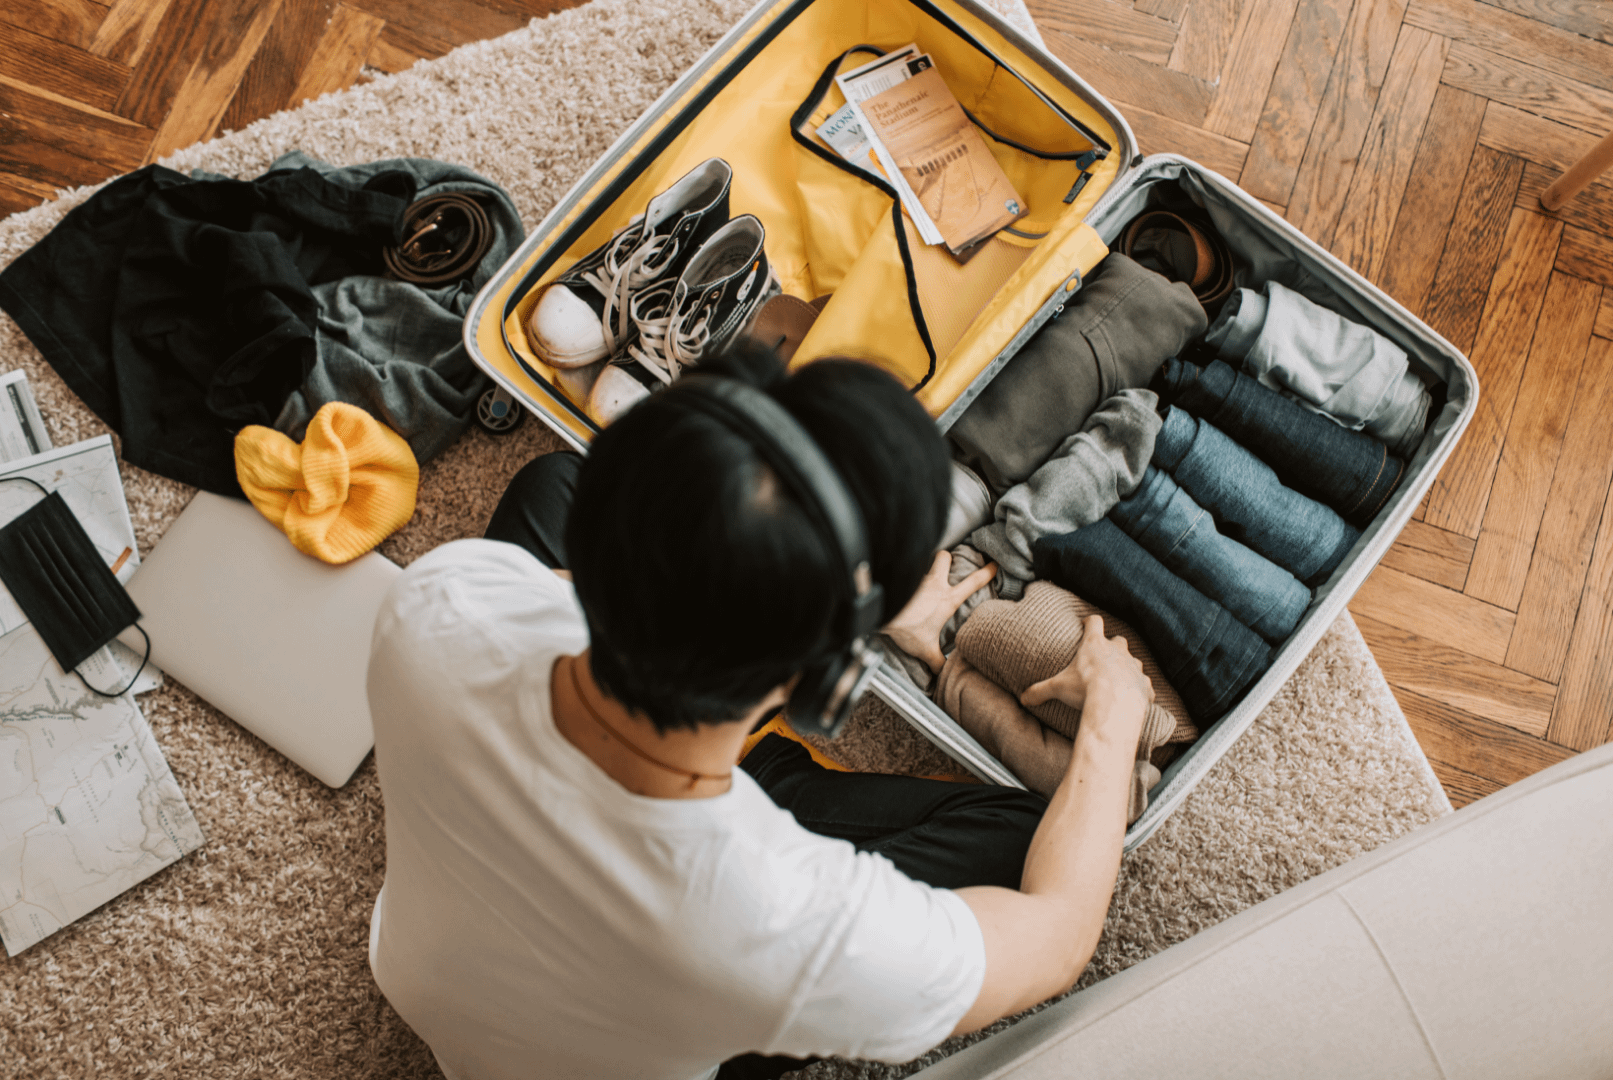 Man in a Suitcase: Dressing Right While Jet-Setting Can Be a Challenge